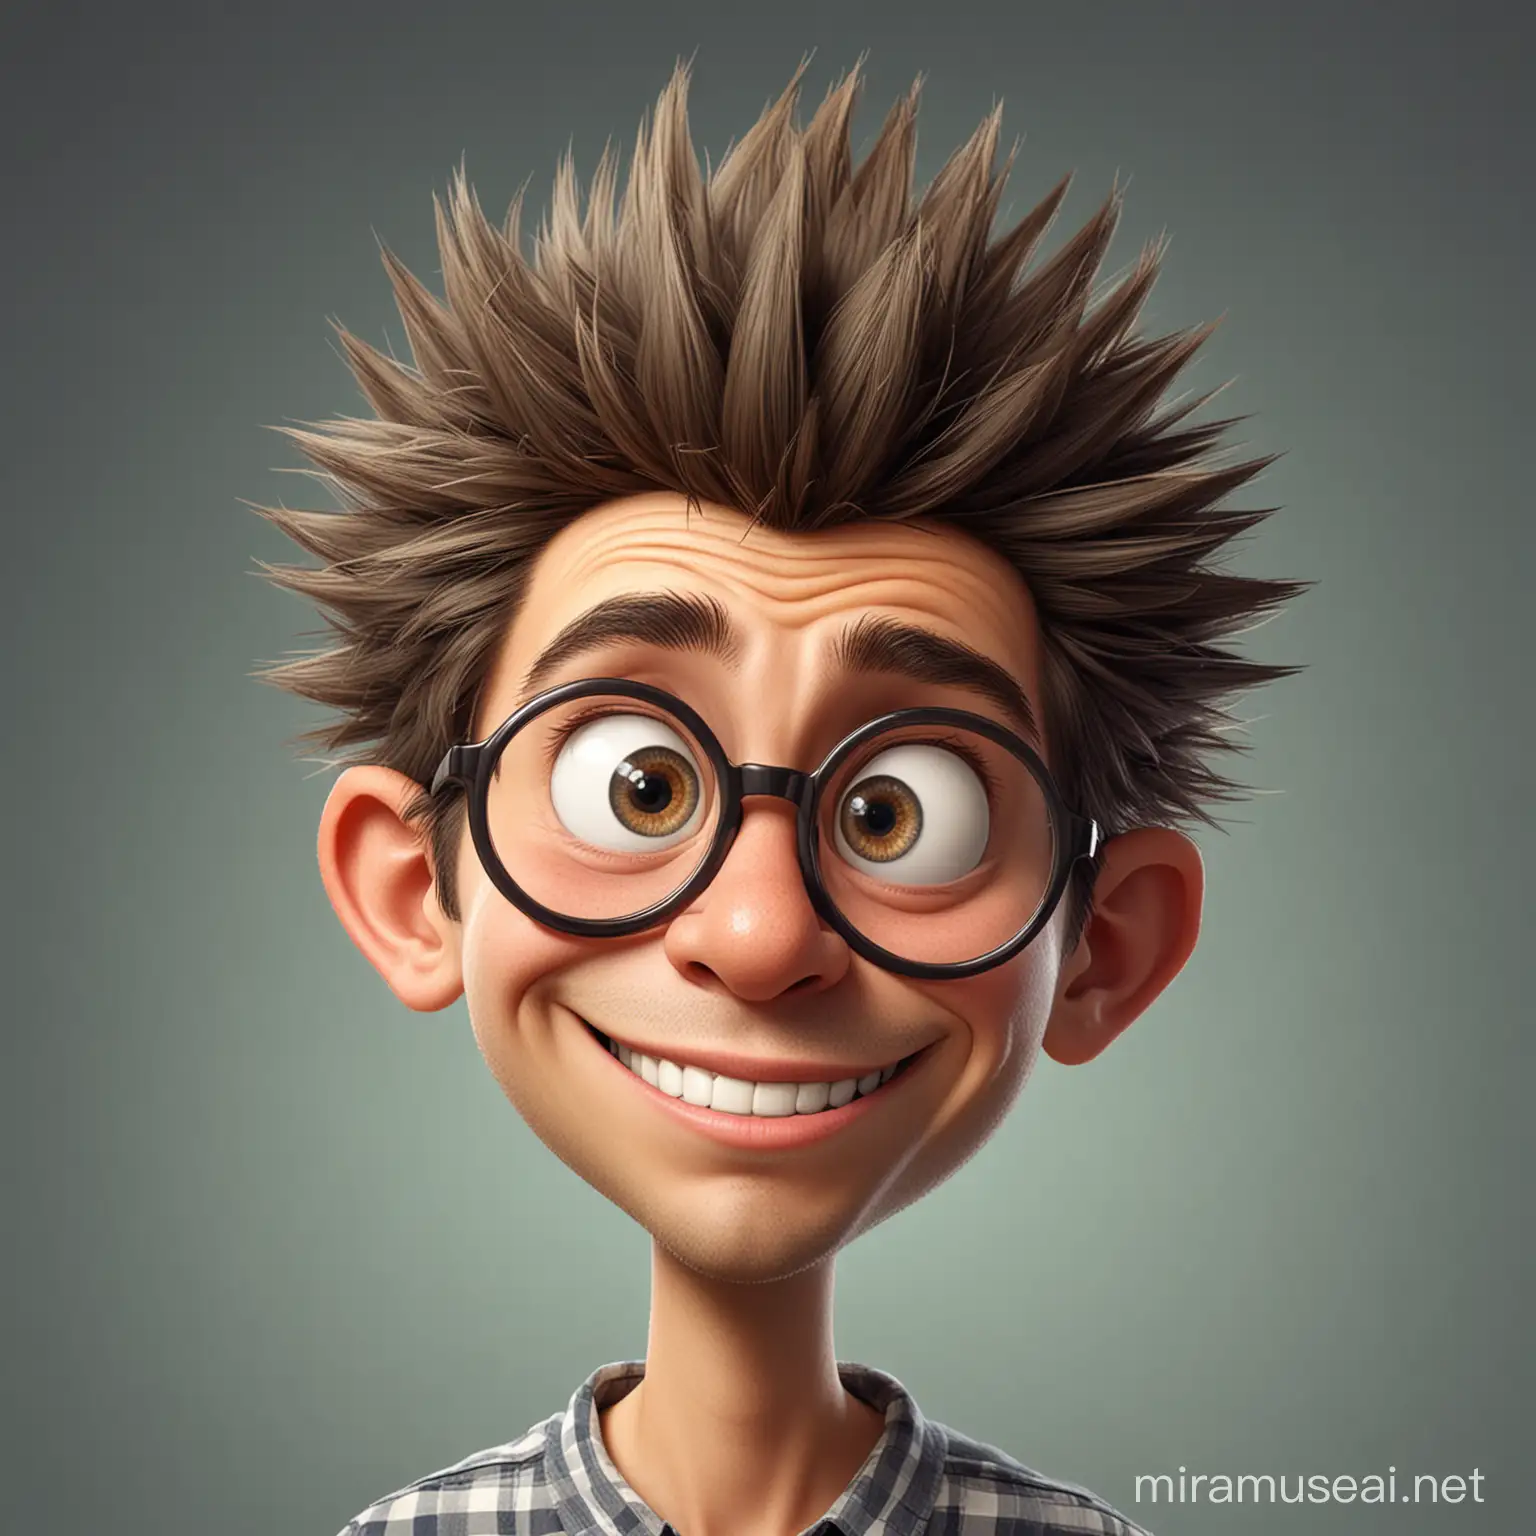 funny caricatur of a lazy 25 year old boy, spiked hair, no beard, big round glasses